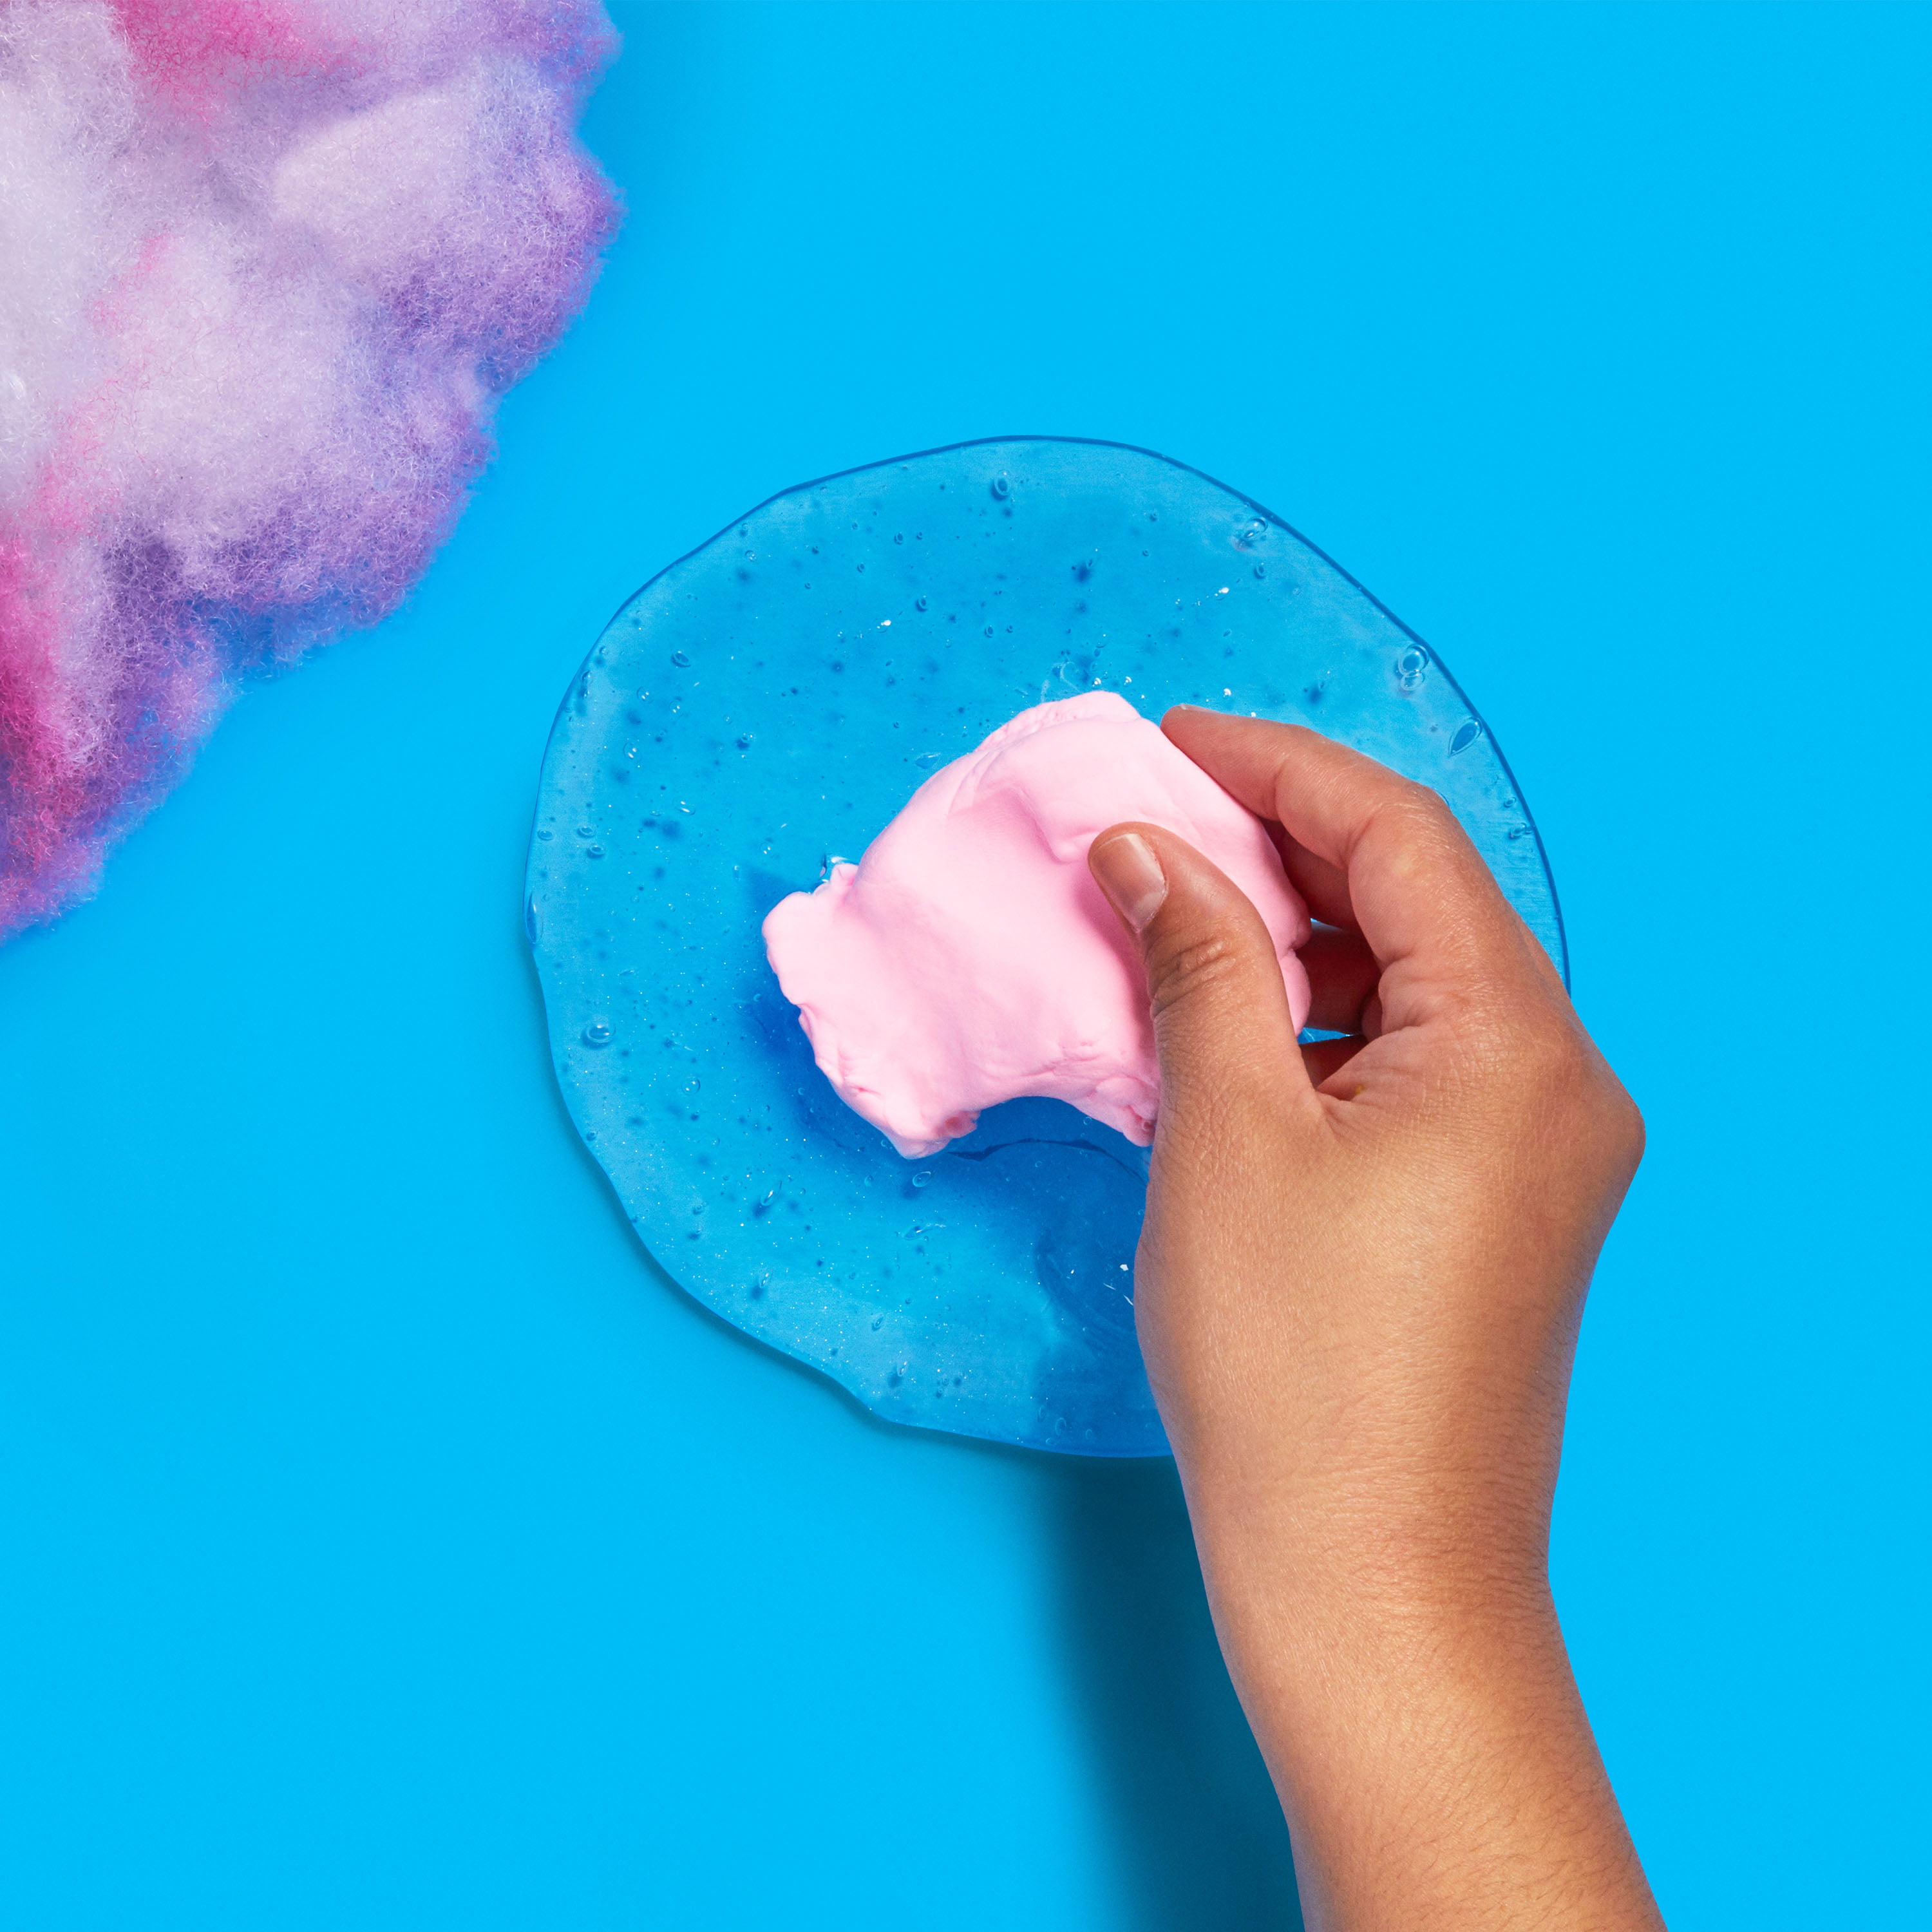 Introducing Unicorn Dream Gue: Ready-to-Play Pre-made Slime!